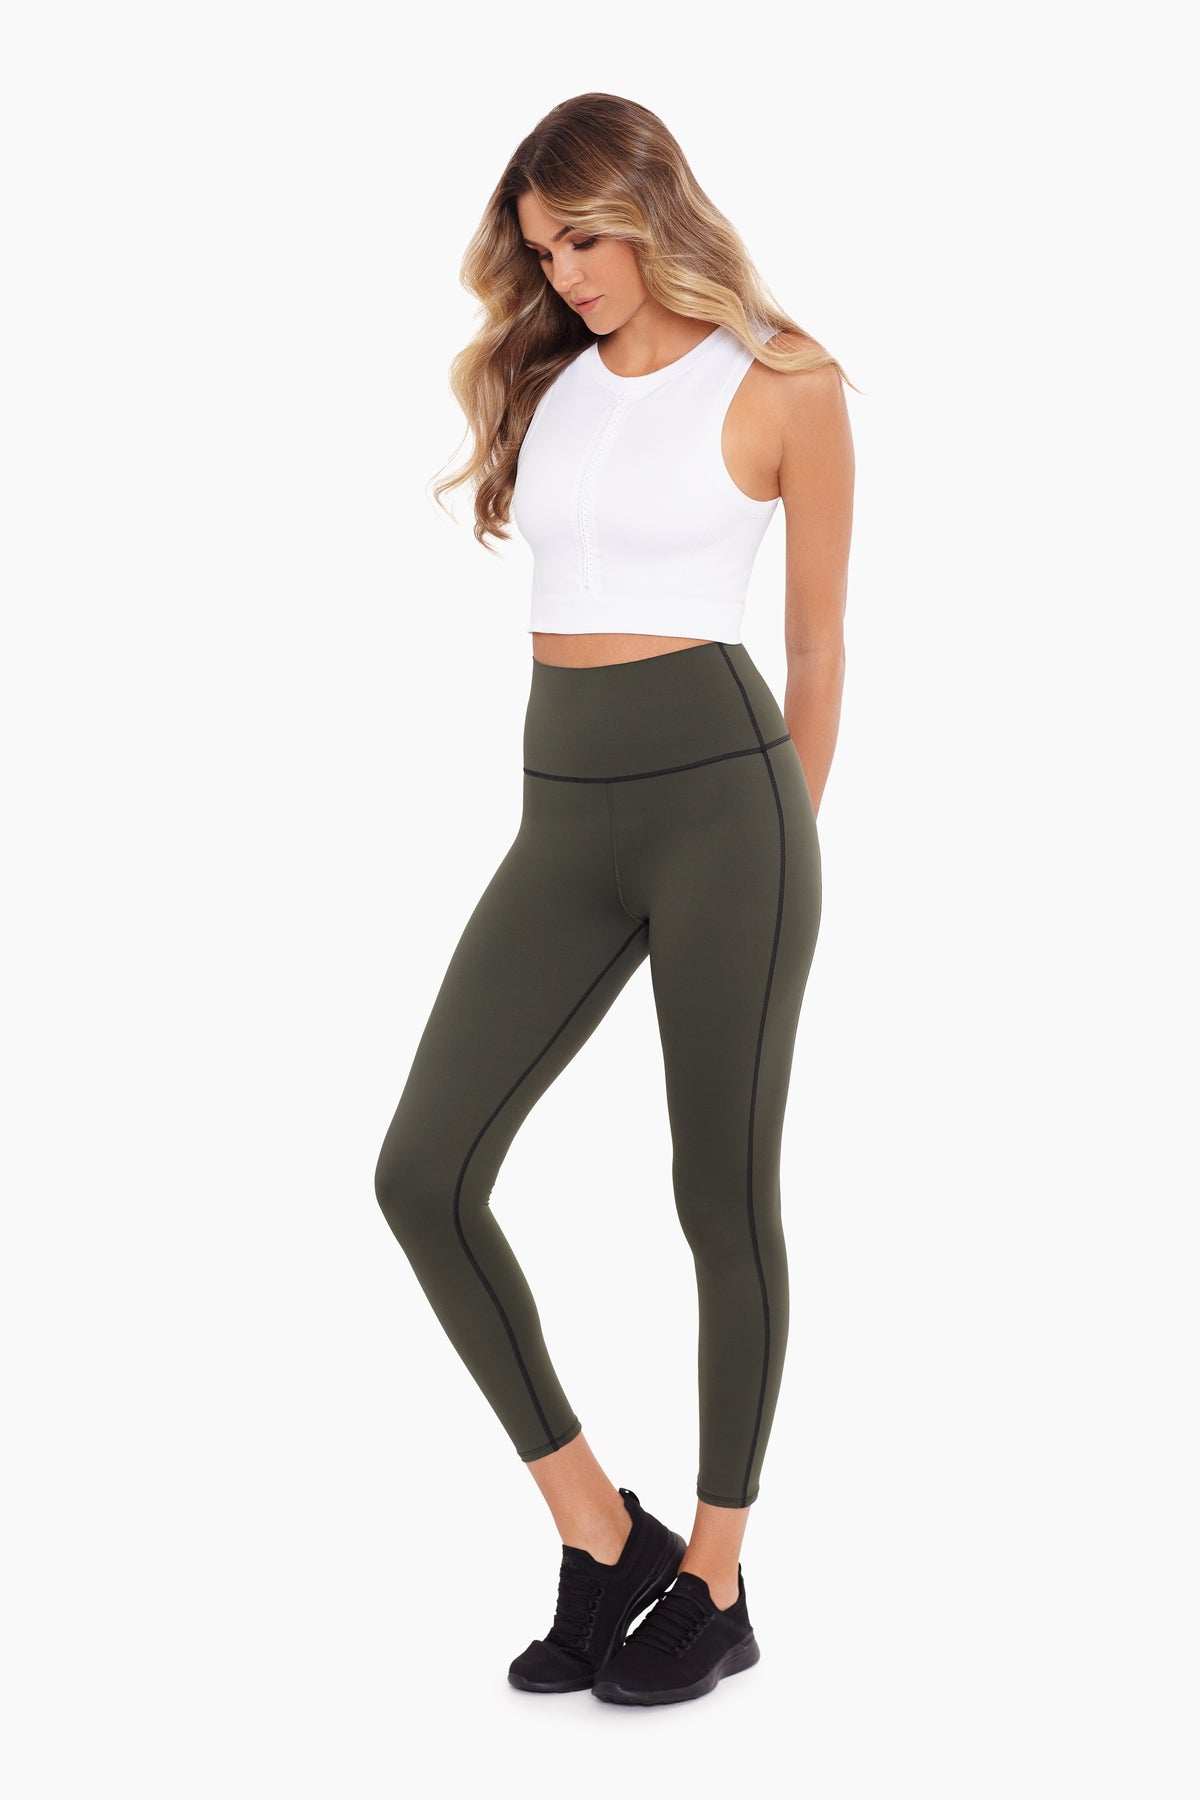 Miraclesuit Tummy-Control Athleisure Leggings - Macy's